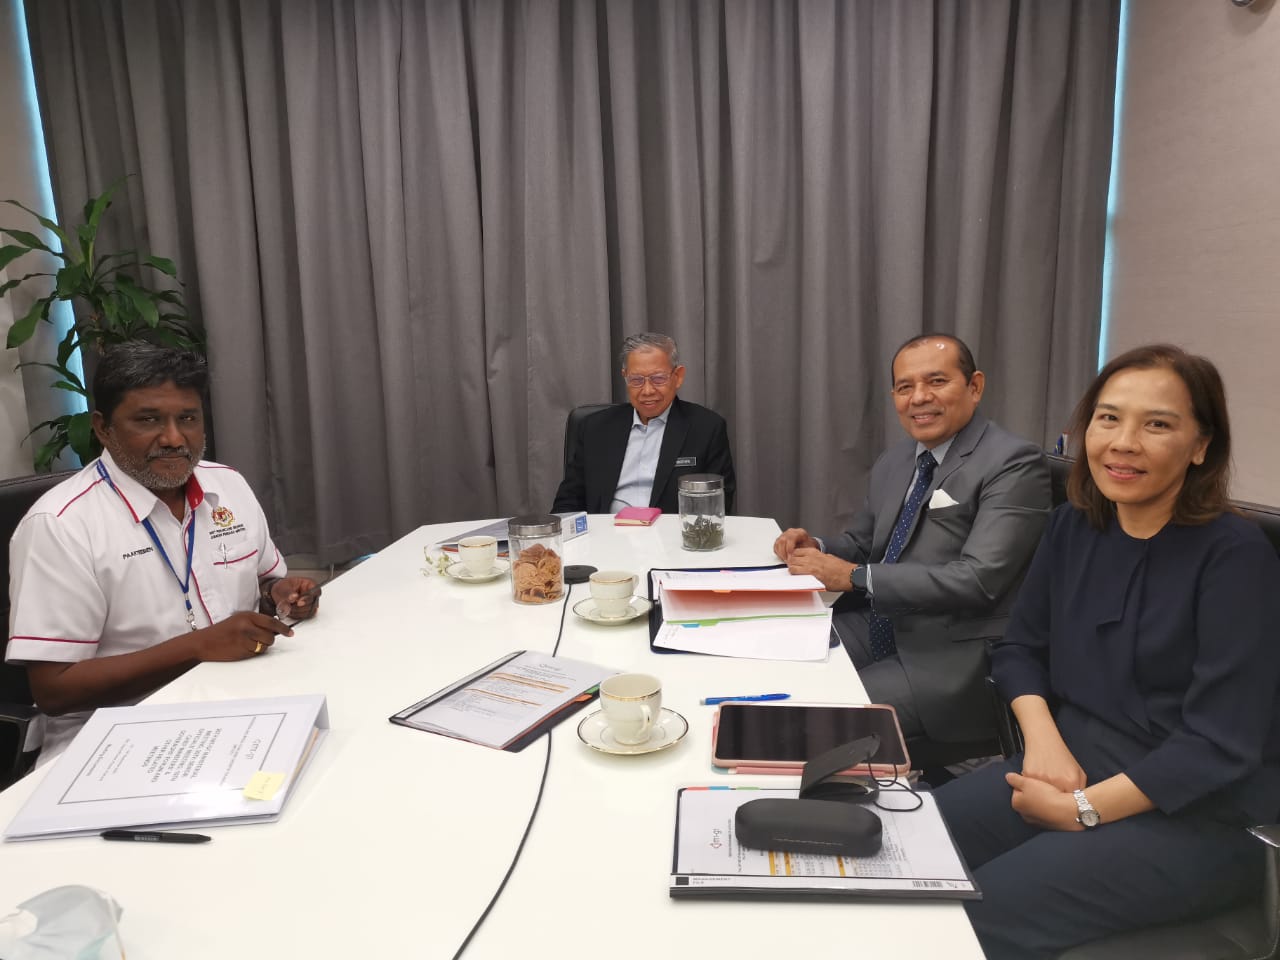 Read more about the article CIMT COURTESY VISIT TO THE MINISTER IN THE PRIME MINISTER’S DEPARTMENT (ECONOMY) OF MALAYSIA